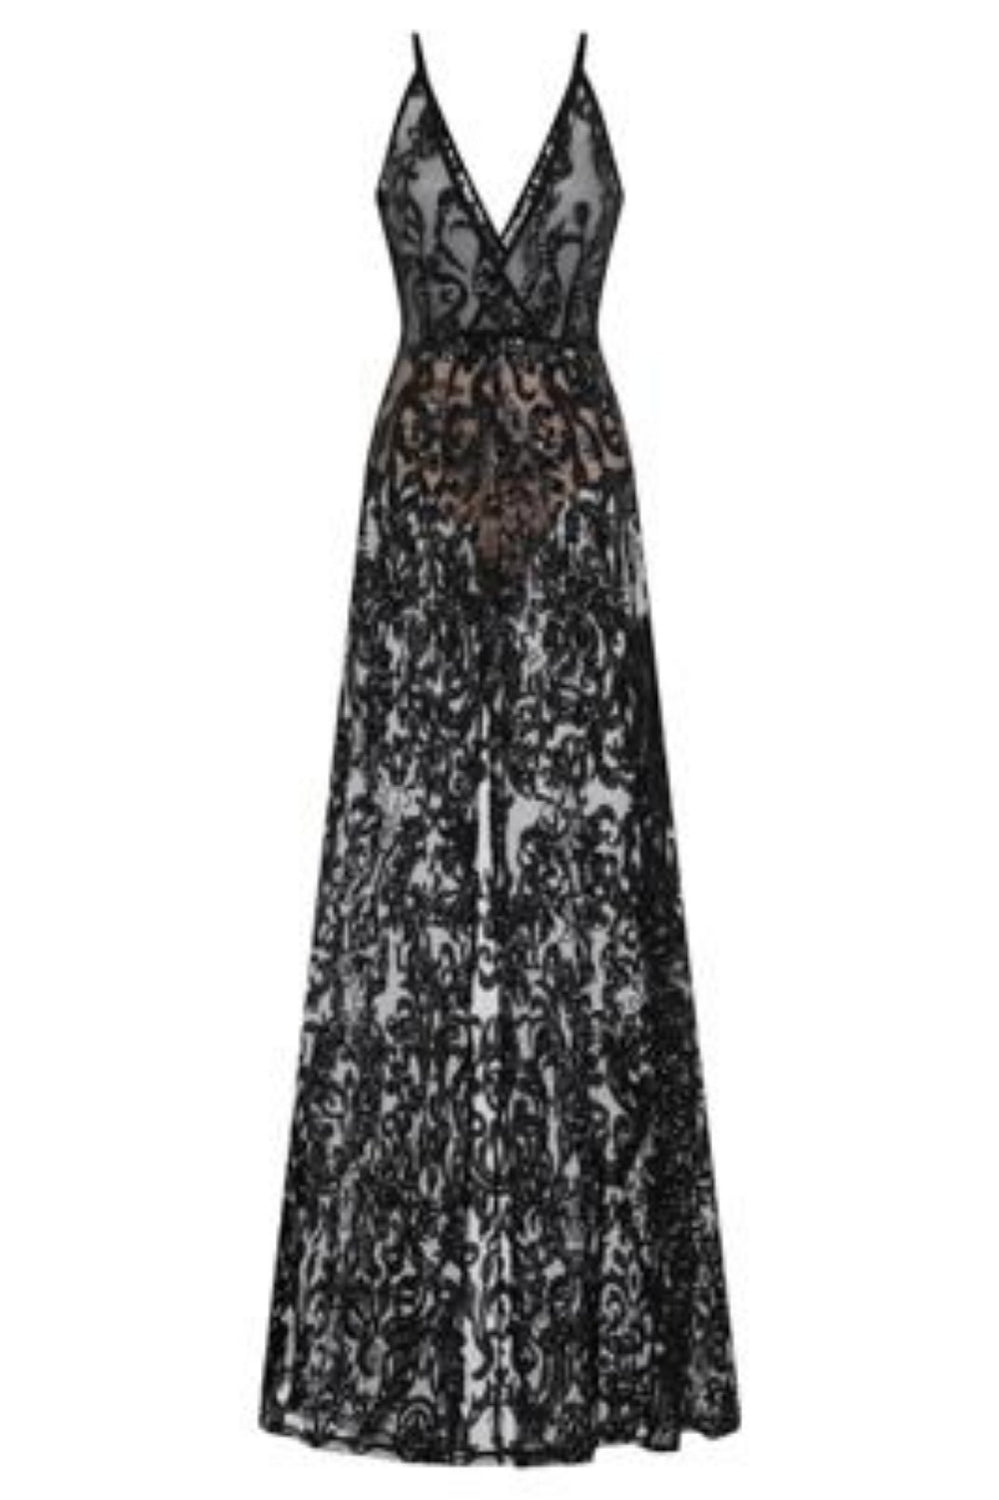 Unleashed Black Sheer Luxe Sequin Slit Maxi Gown Dress